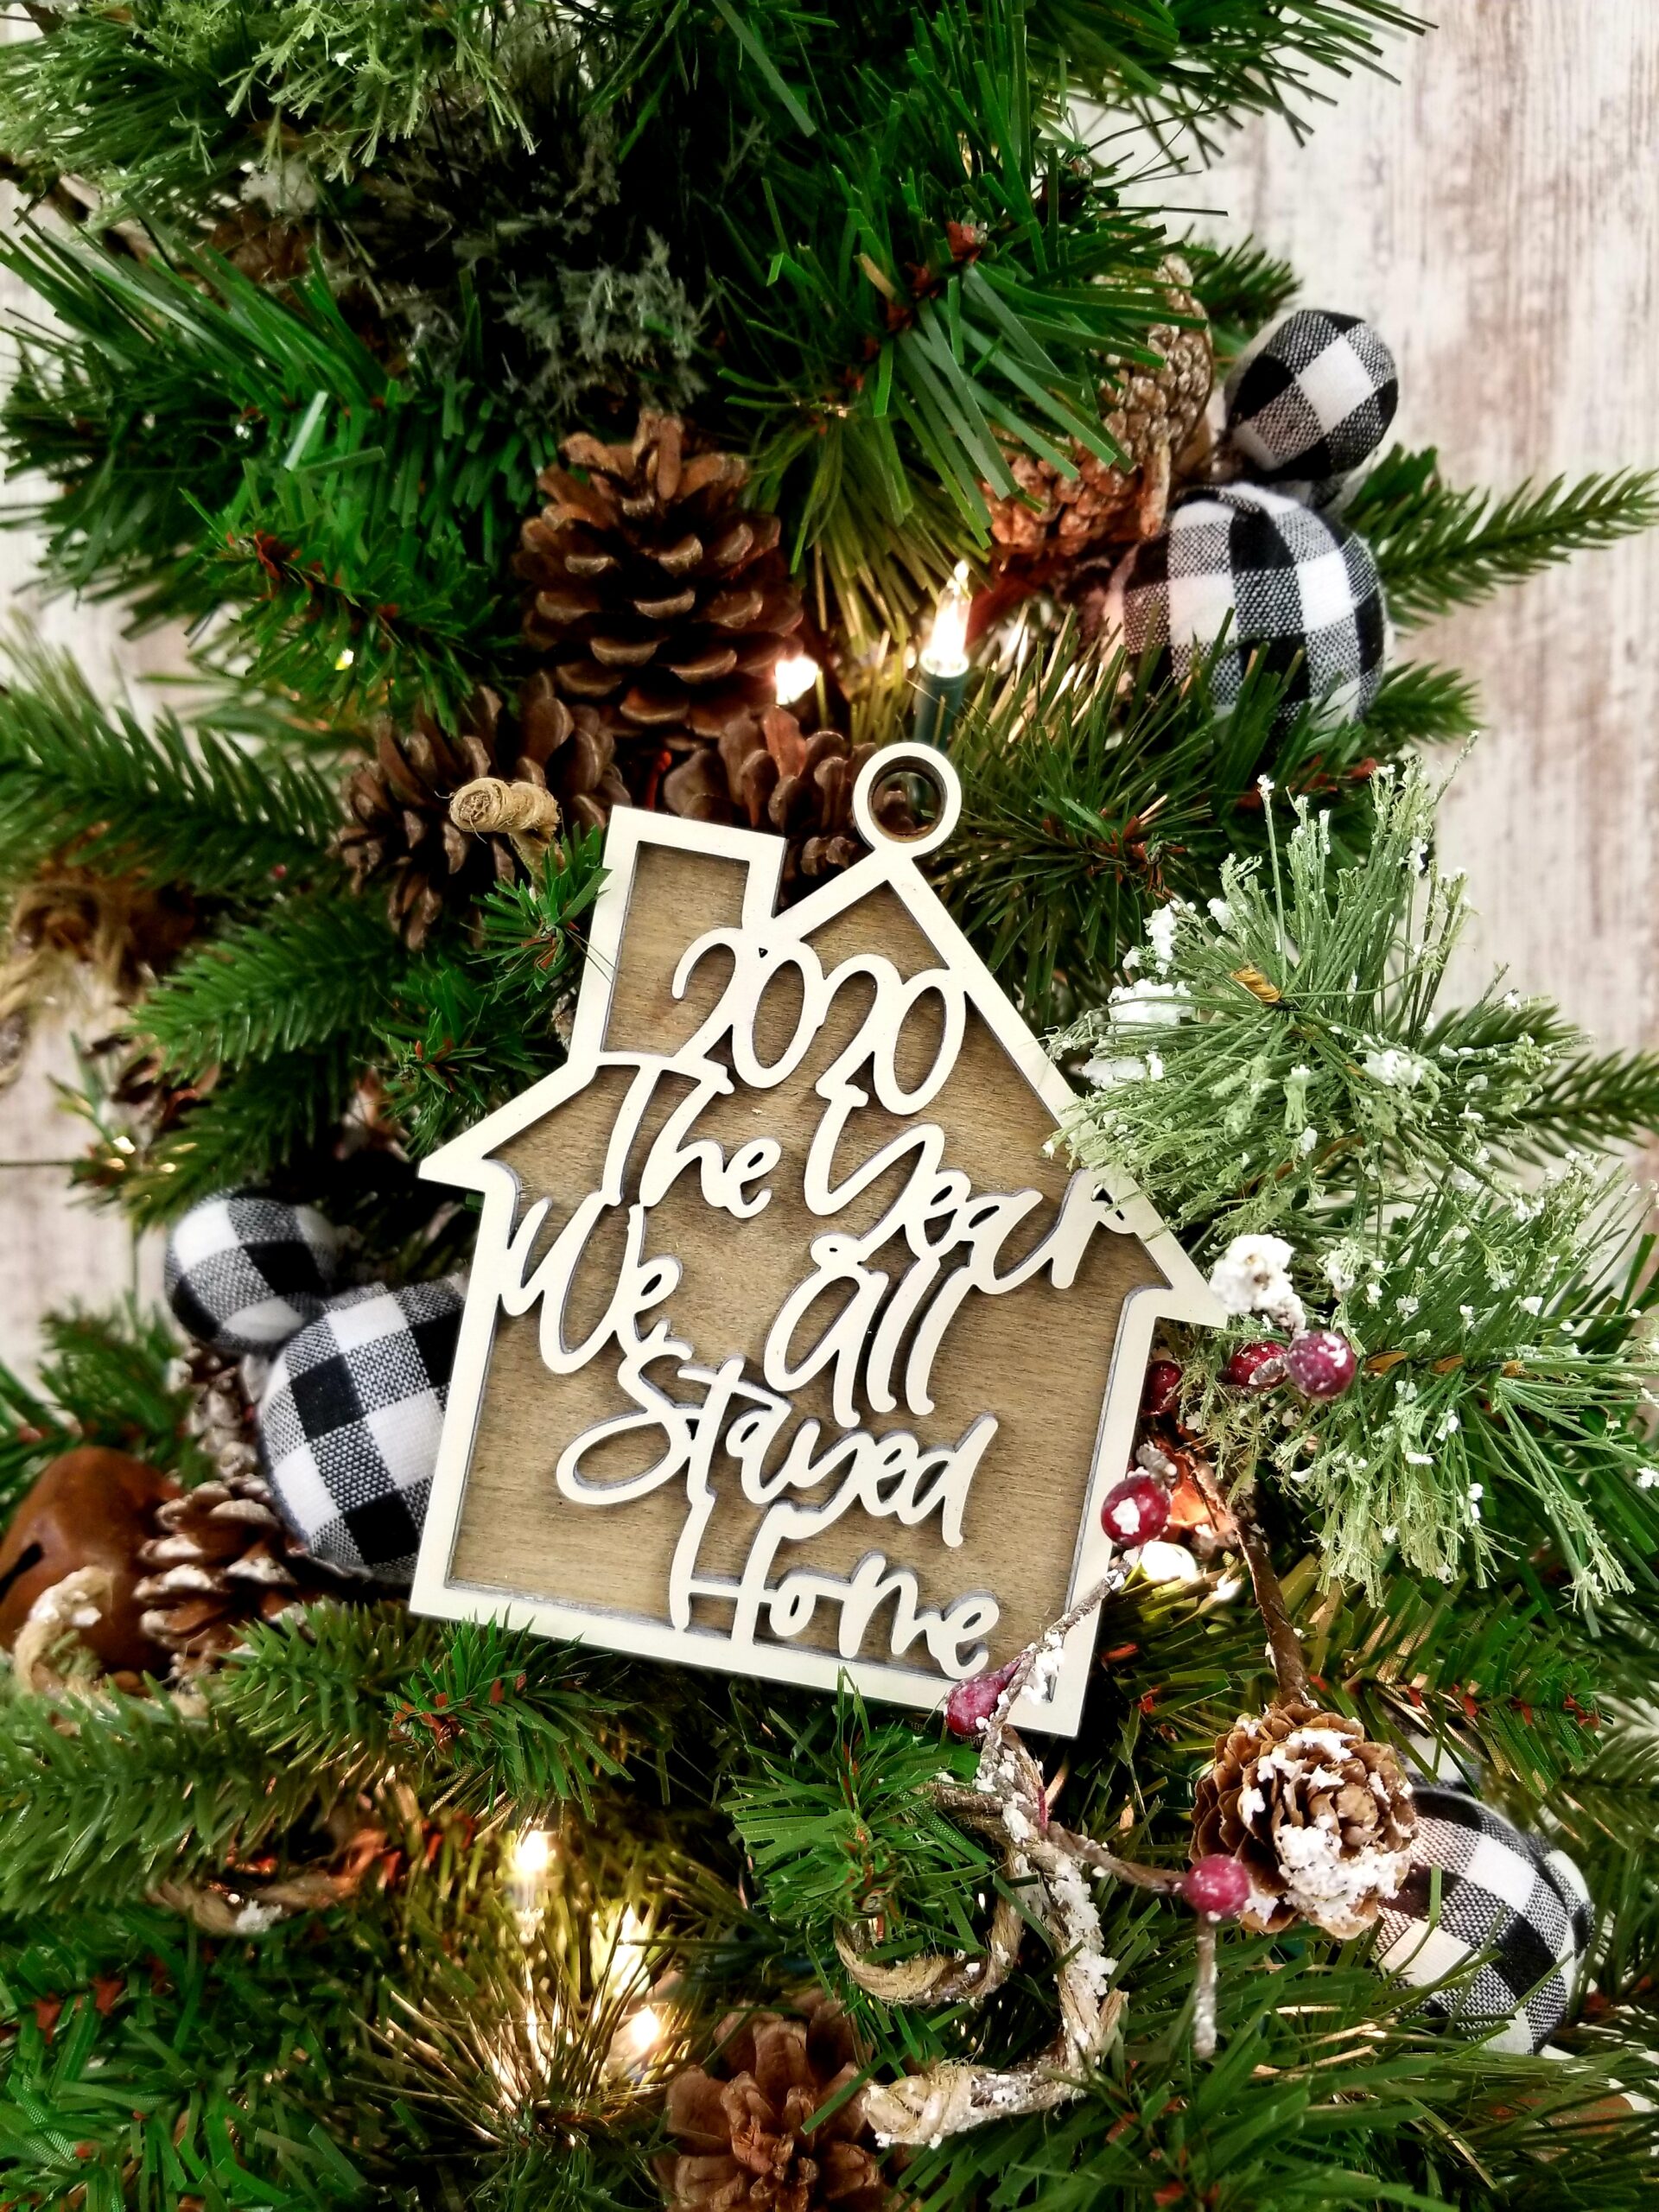 2020 We Stayed Home Ornament